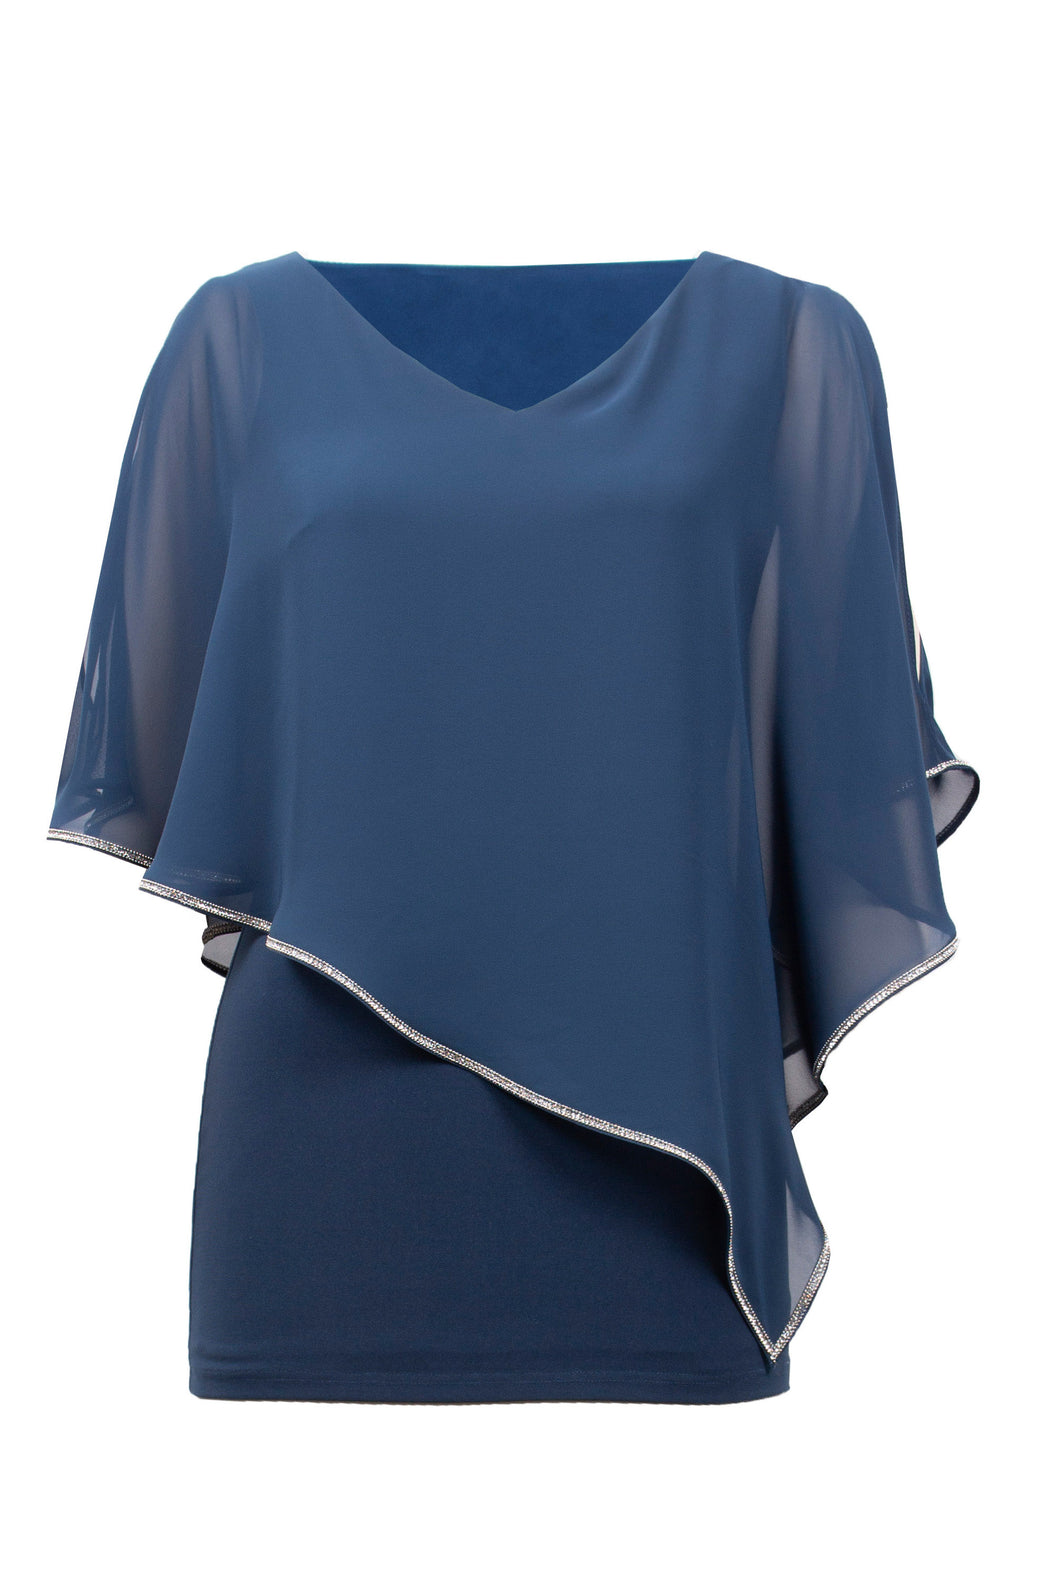 Joseph Ribkoff Chiffon V-Neck Top with Attached Cape & Jewel Trim in Nightfall or Mulberry